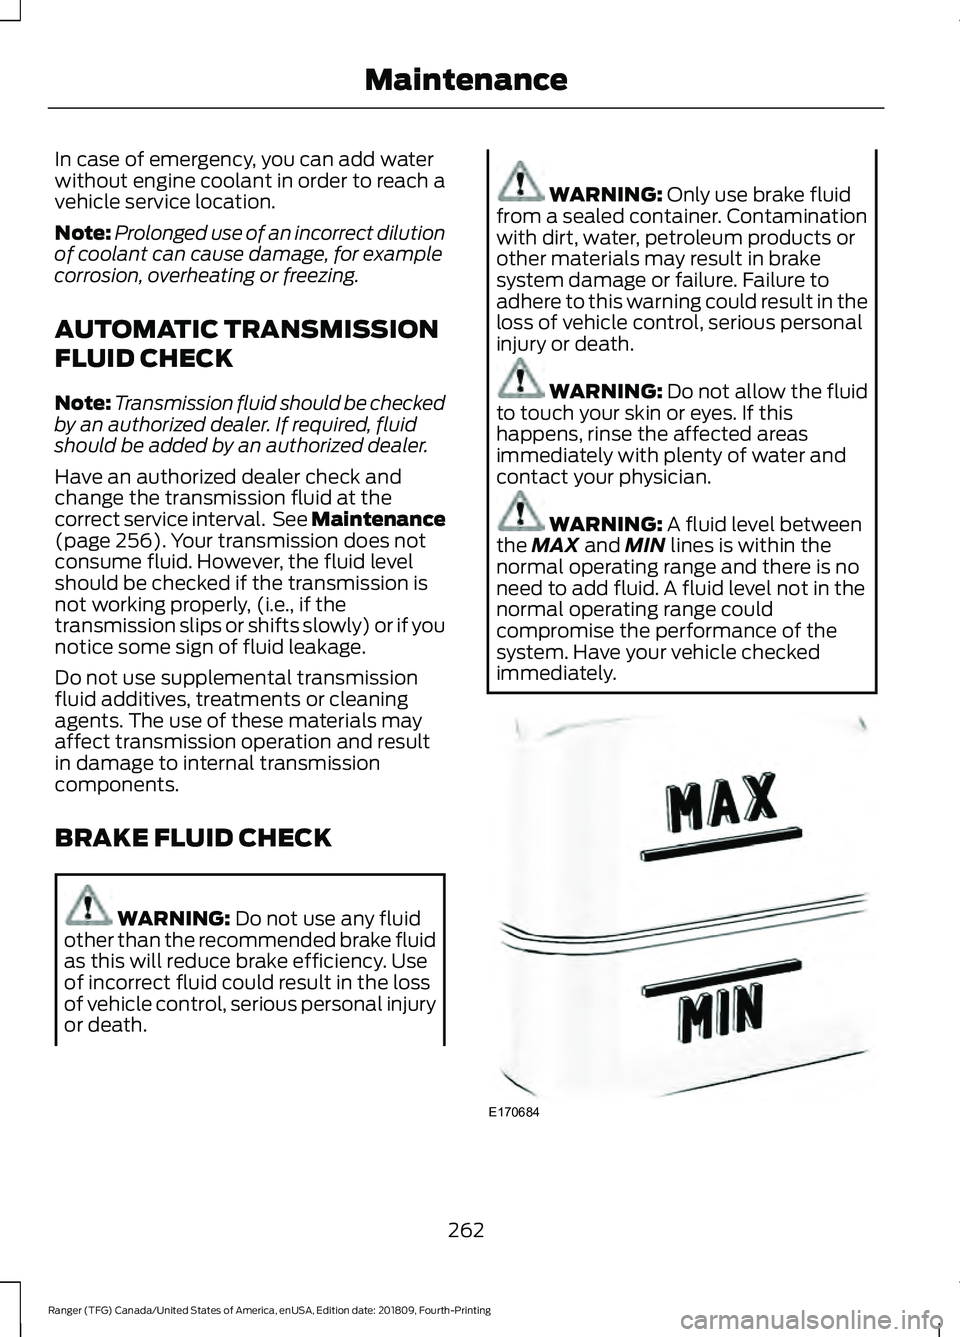 FORD RANGER 2019  Owners Manual In case of emergency, you can add water
without engine coolant in order to reach a
vehicle service location.
Note:
Prolonged use of an incorrect dilution
of coolant can cause damage, for example
corro